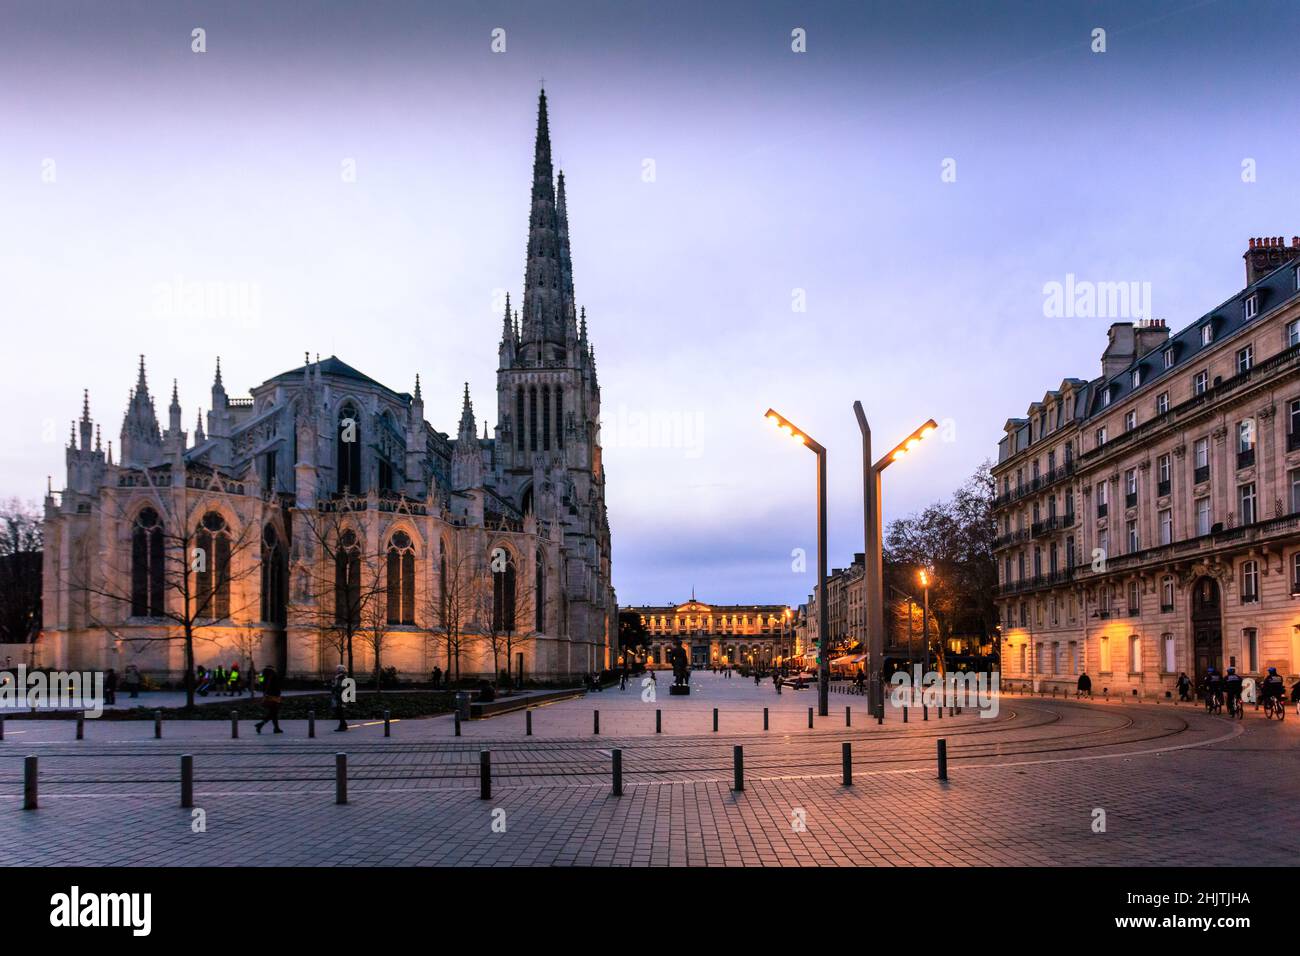 Saint Andrew Cathedral in Bordeaux, France. A Gothic Roman Catholic cathedral built on the site of a previous Romanesque church. Stock Photo